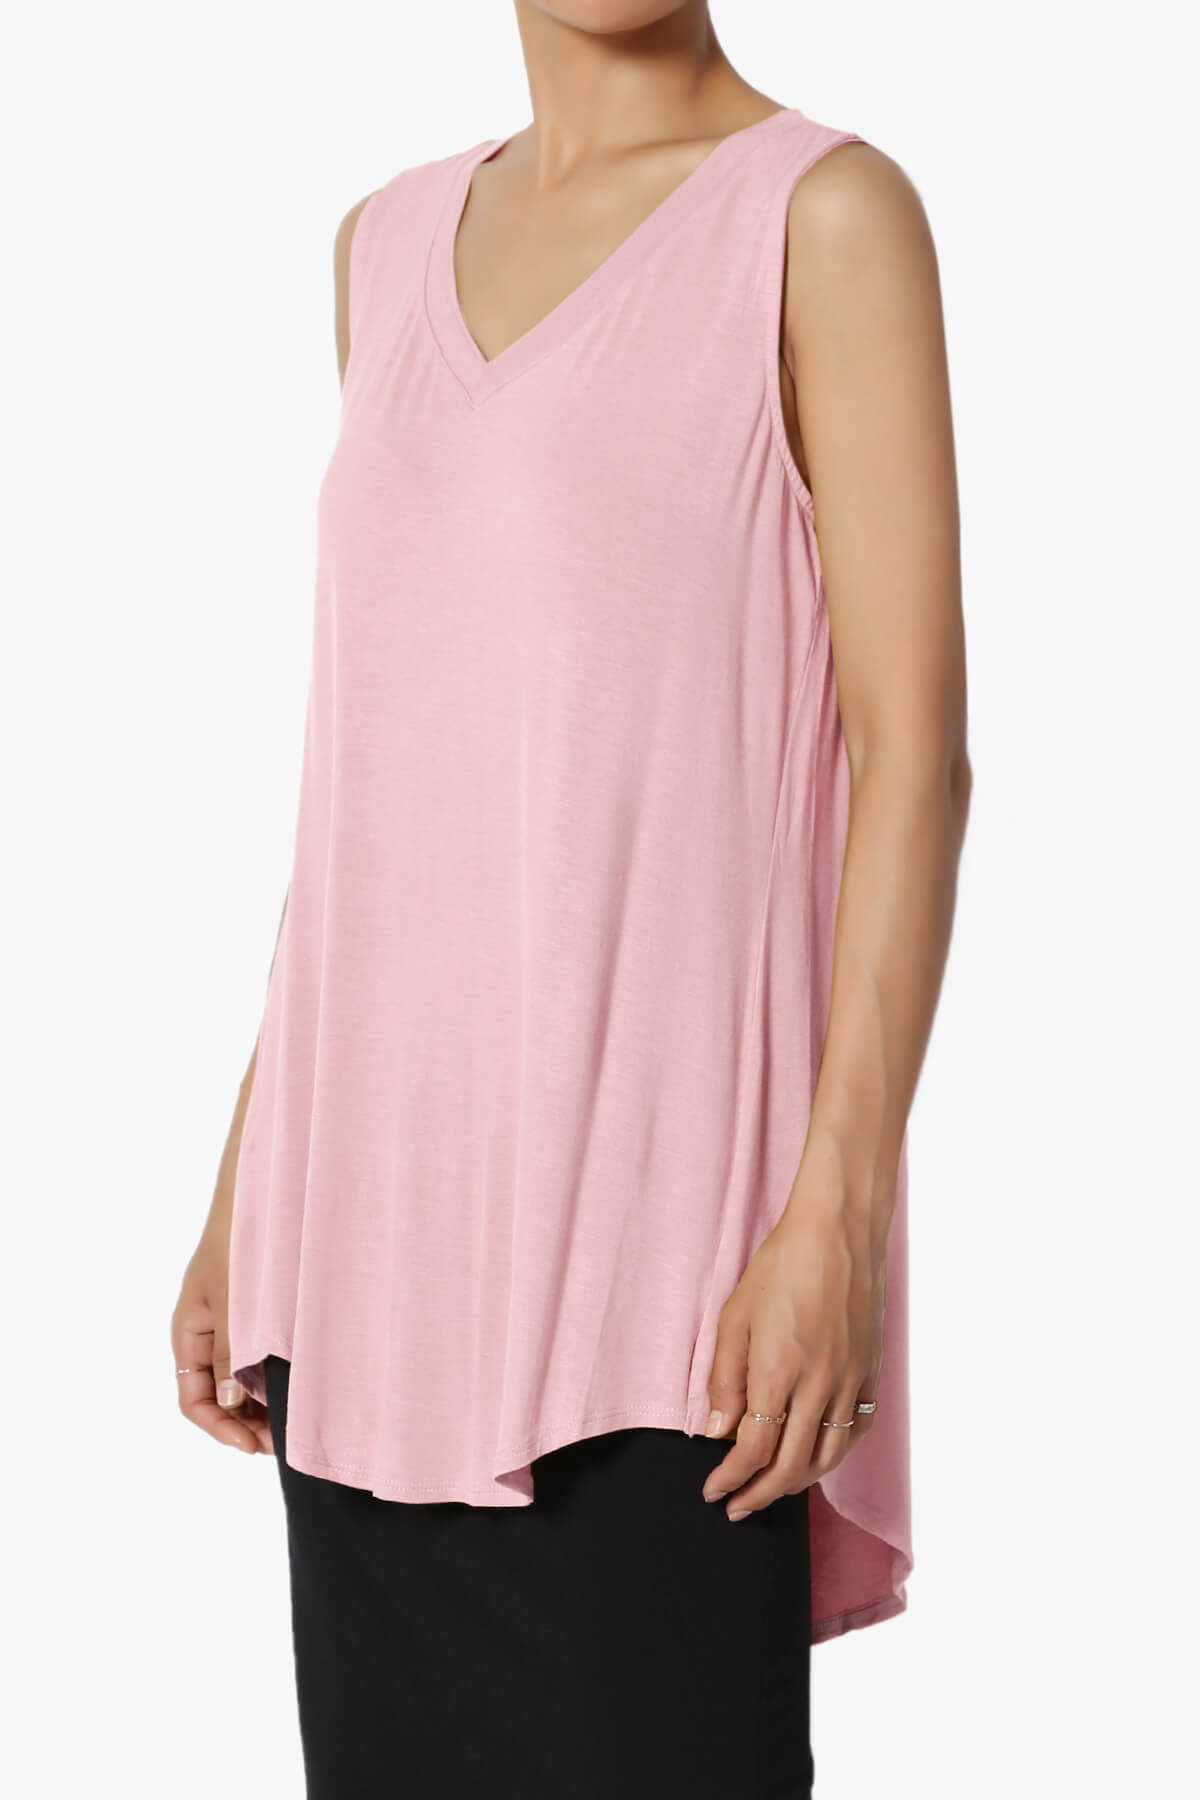 Myles Sleeveless V-Neck Luxe Jersey Top DUSTY PINK_3